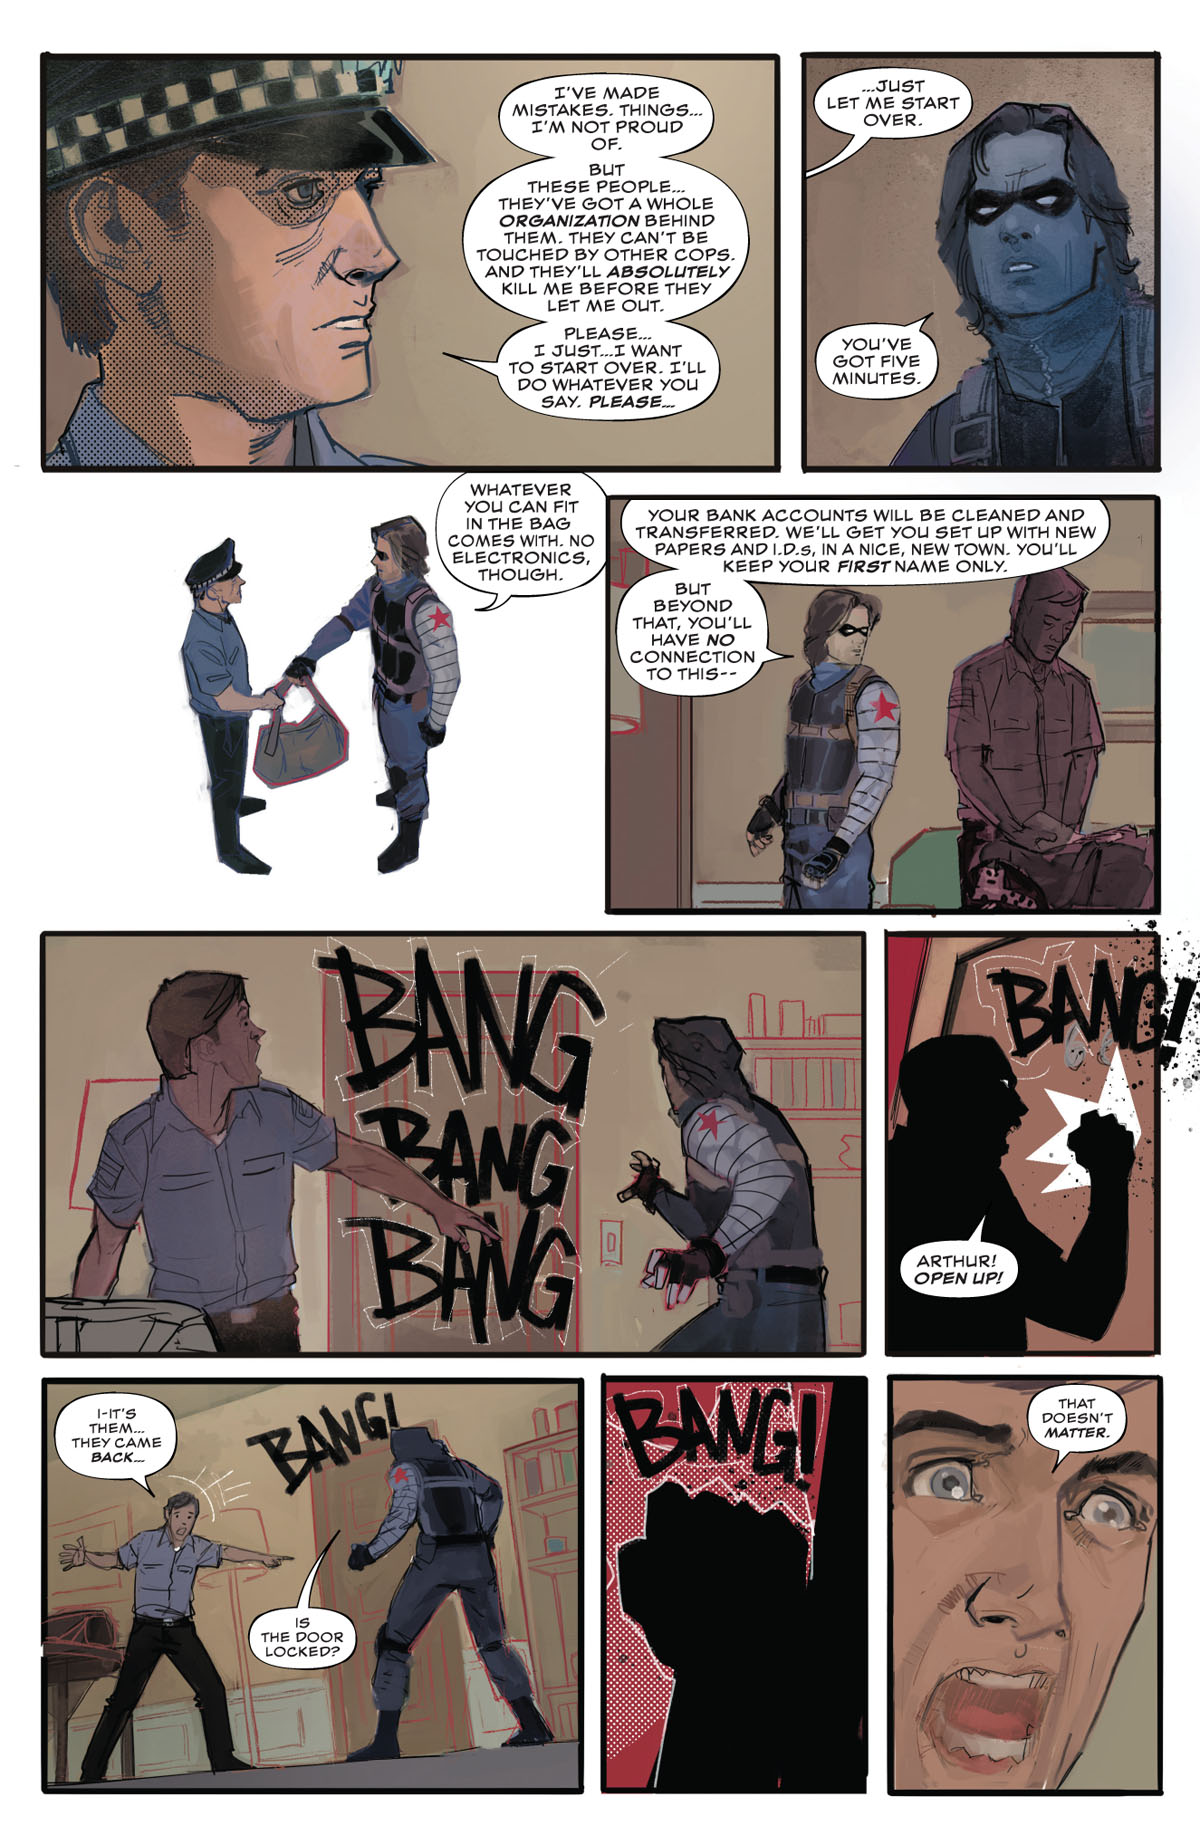 Winter Soldier #1 page 4